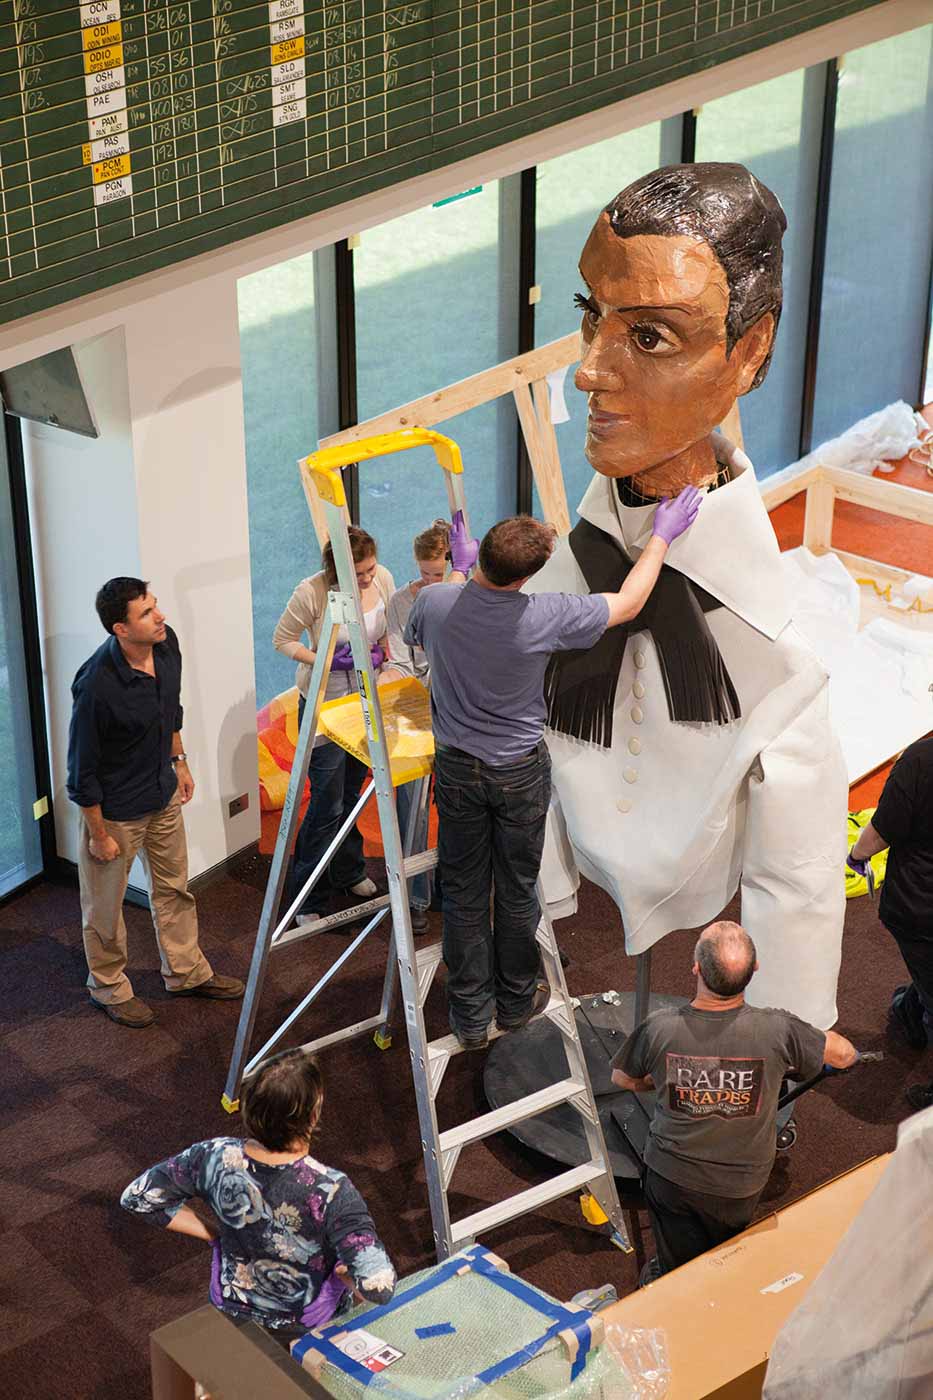 Photograph taken from above, looking down at an oversized puppet consisting of a female face, constructed of painted papier-mache. The woman wears a white collared-shirt and black taselled scarf. A man on the third rung of a large ladder reaches up to adjust the puppet's collar. Five other people stand in the gallery space.